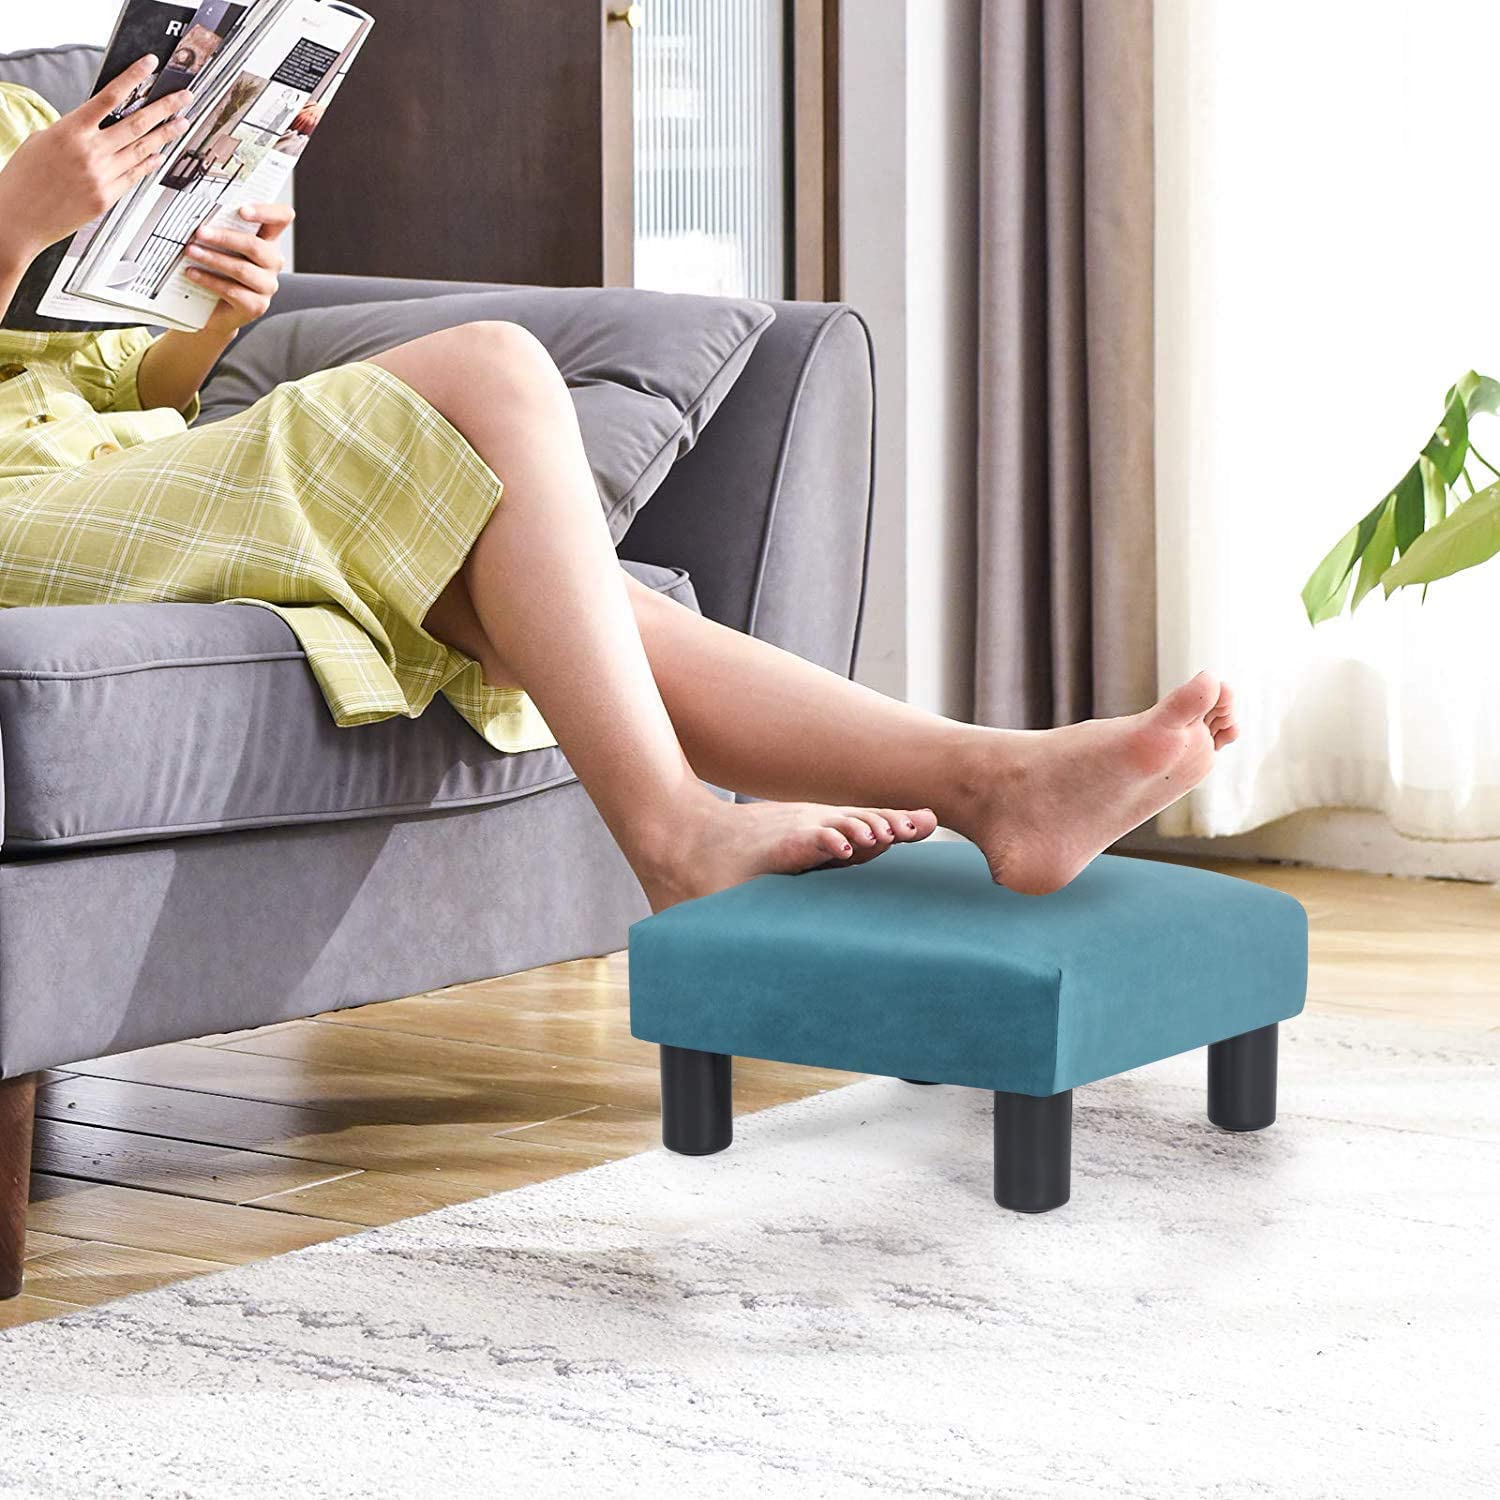 Modern Faux Leather Ottoman Footrest Stool Foot Rest, Small